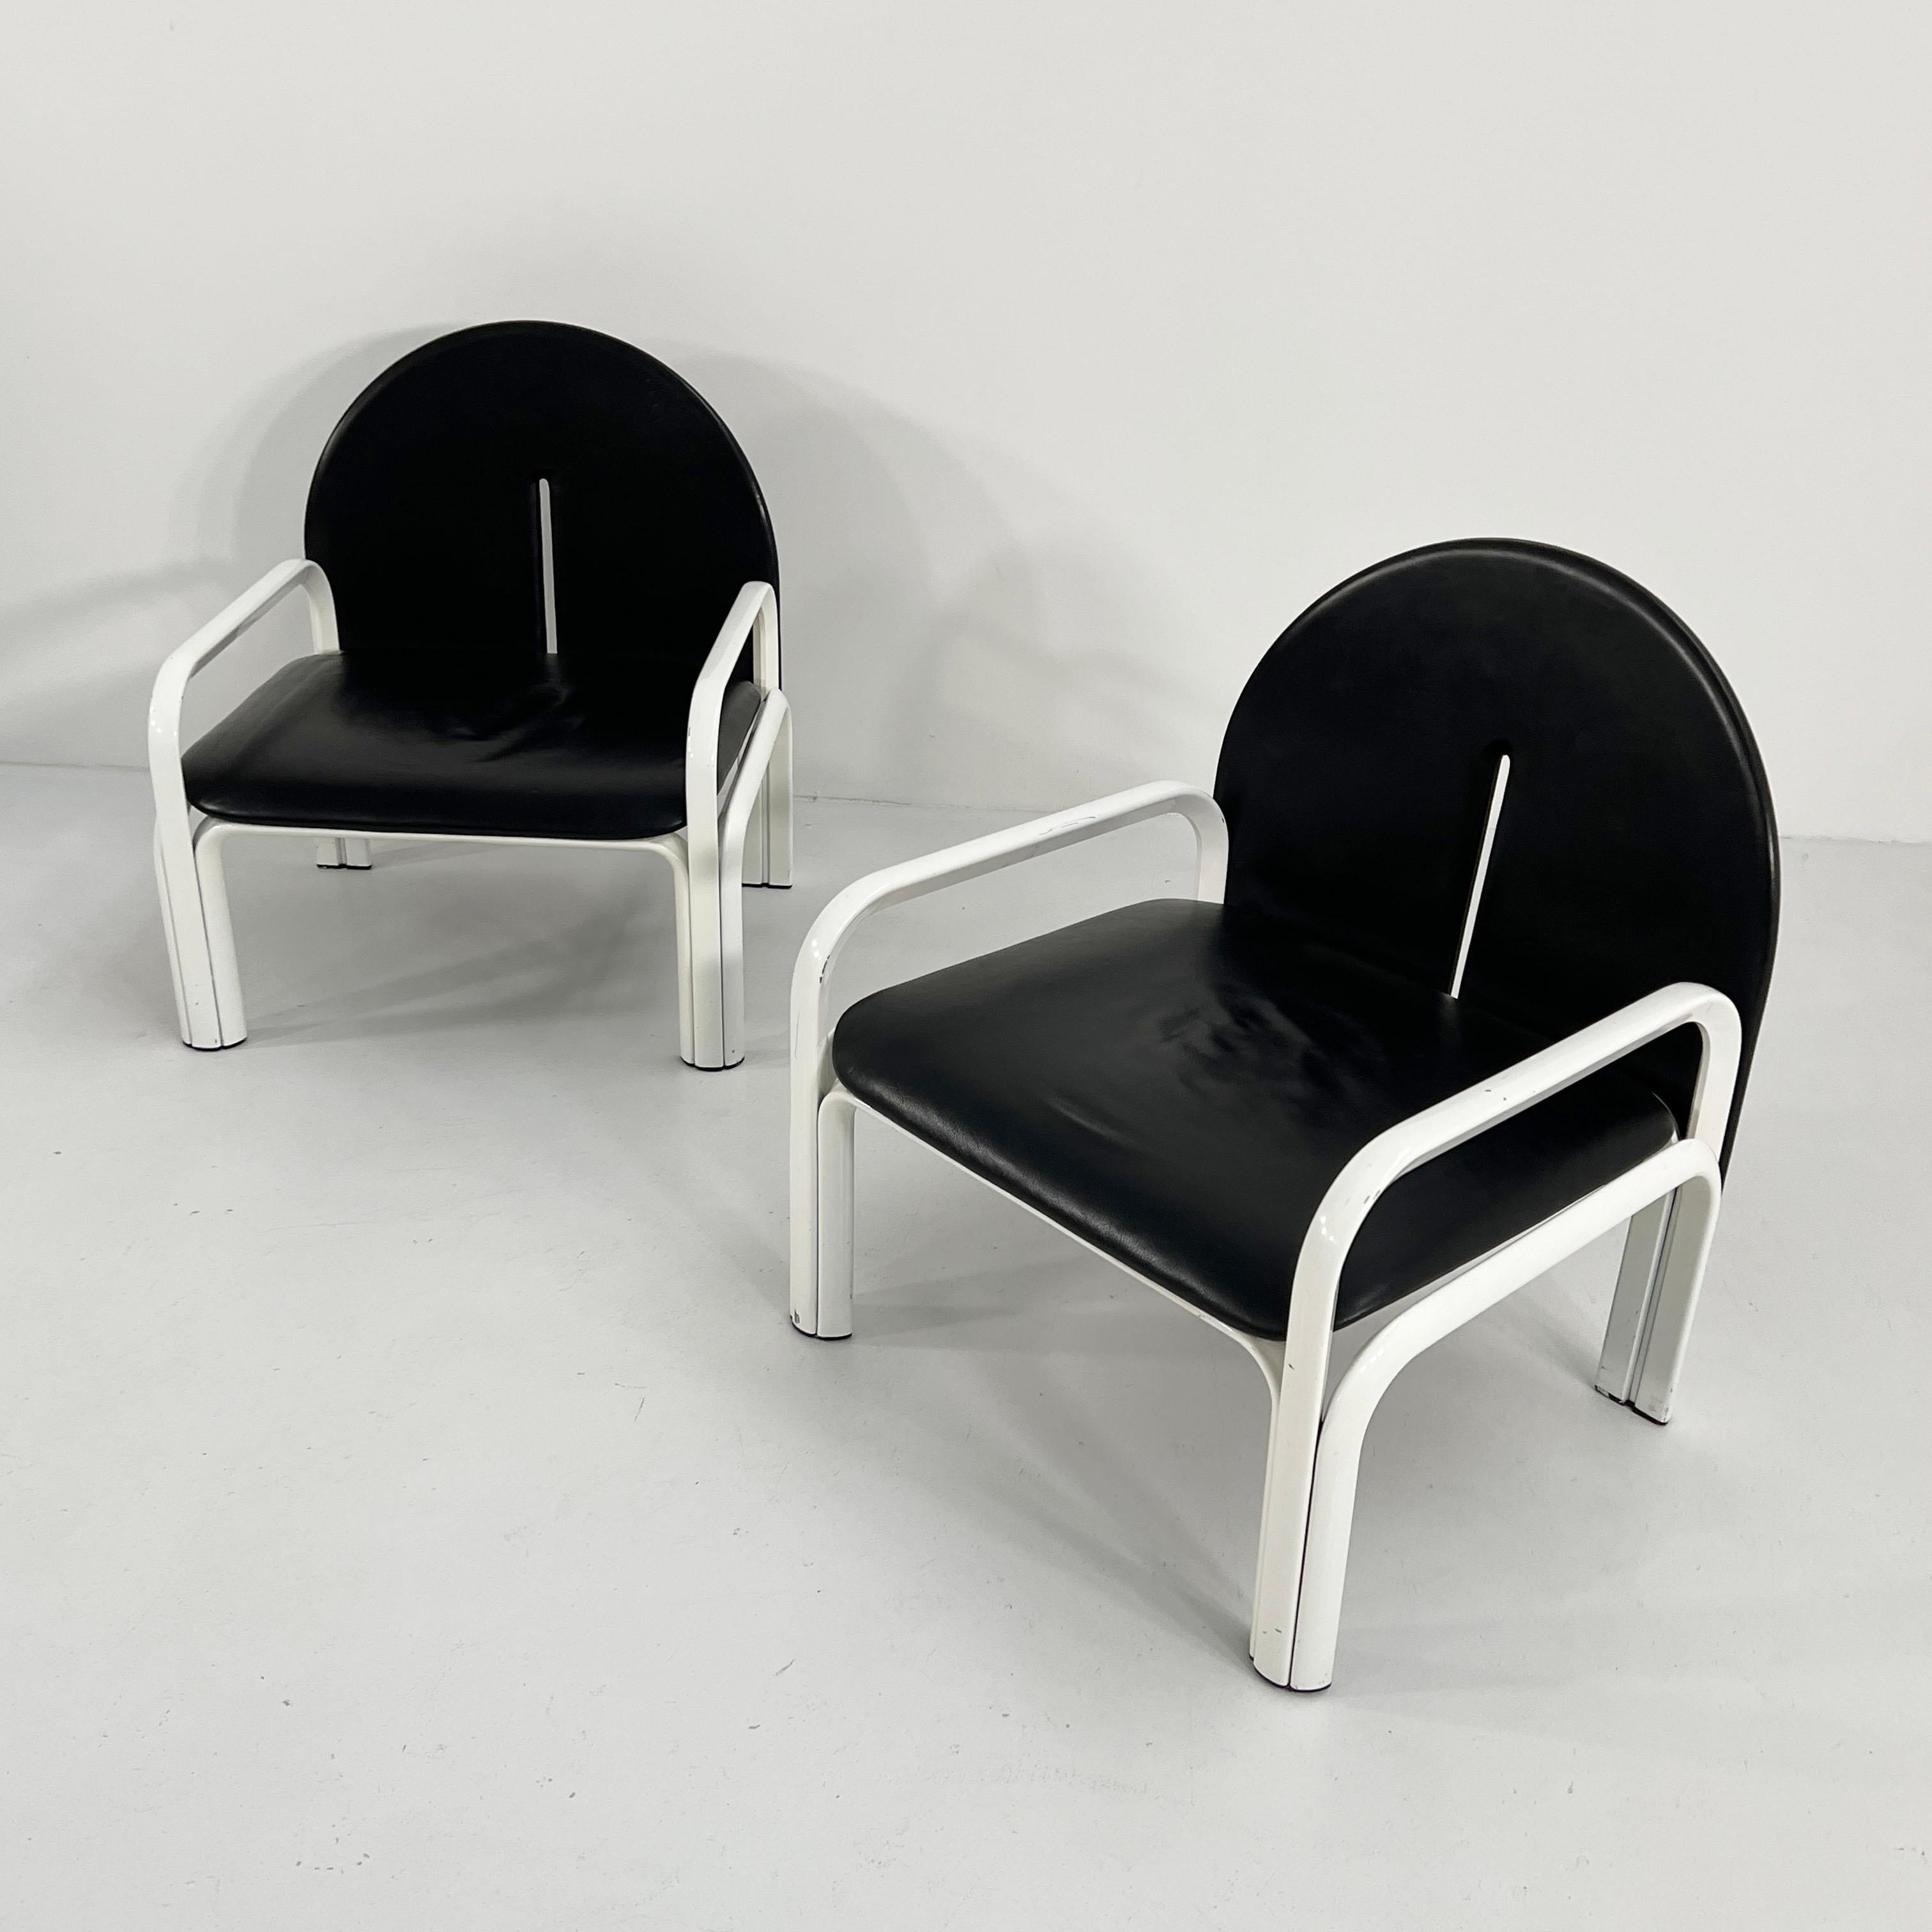 Metal Pair of 54 L Armchairs by Gae Aulenti for Knoll International, 1970s For Sale